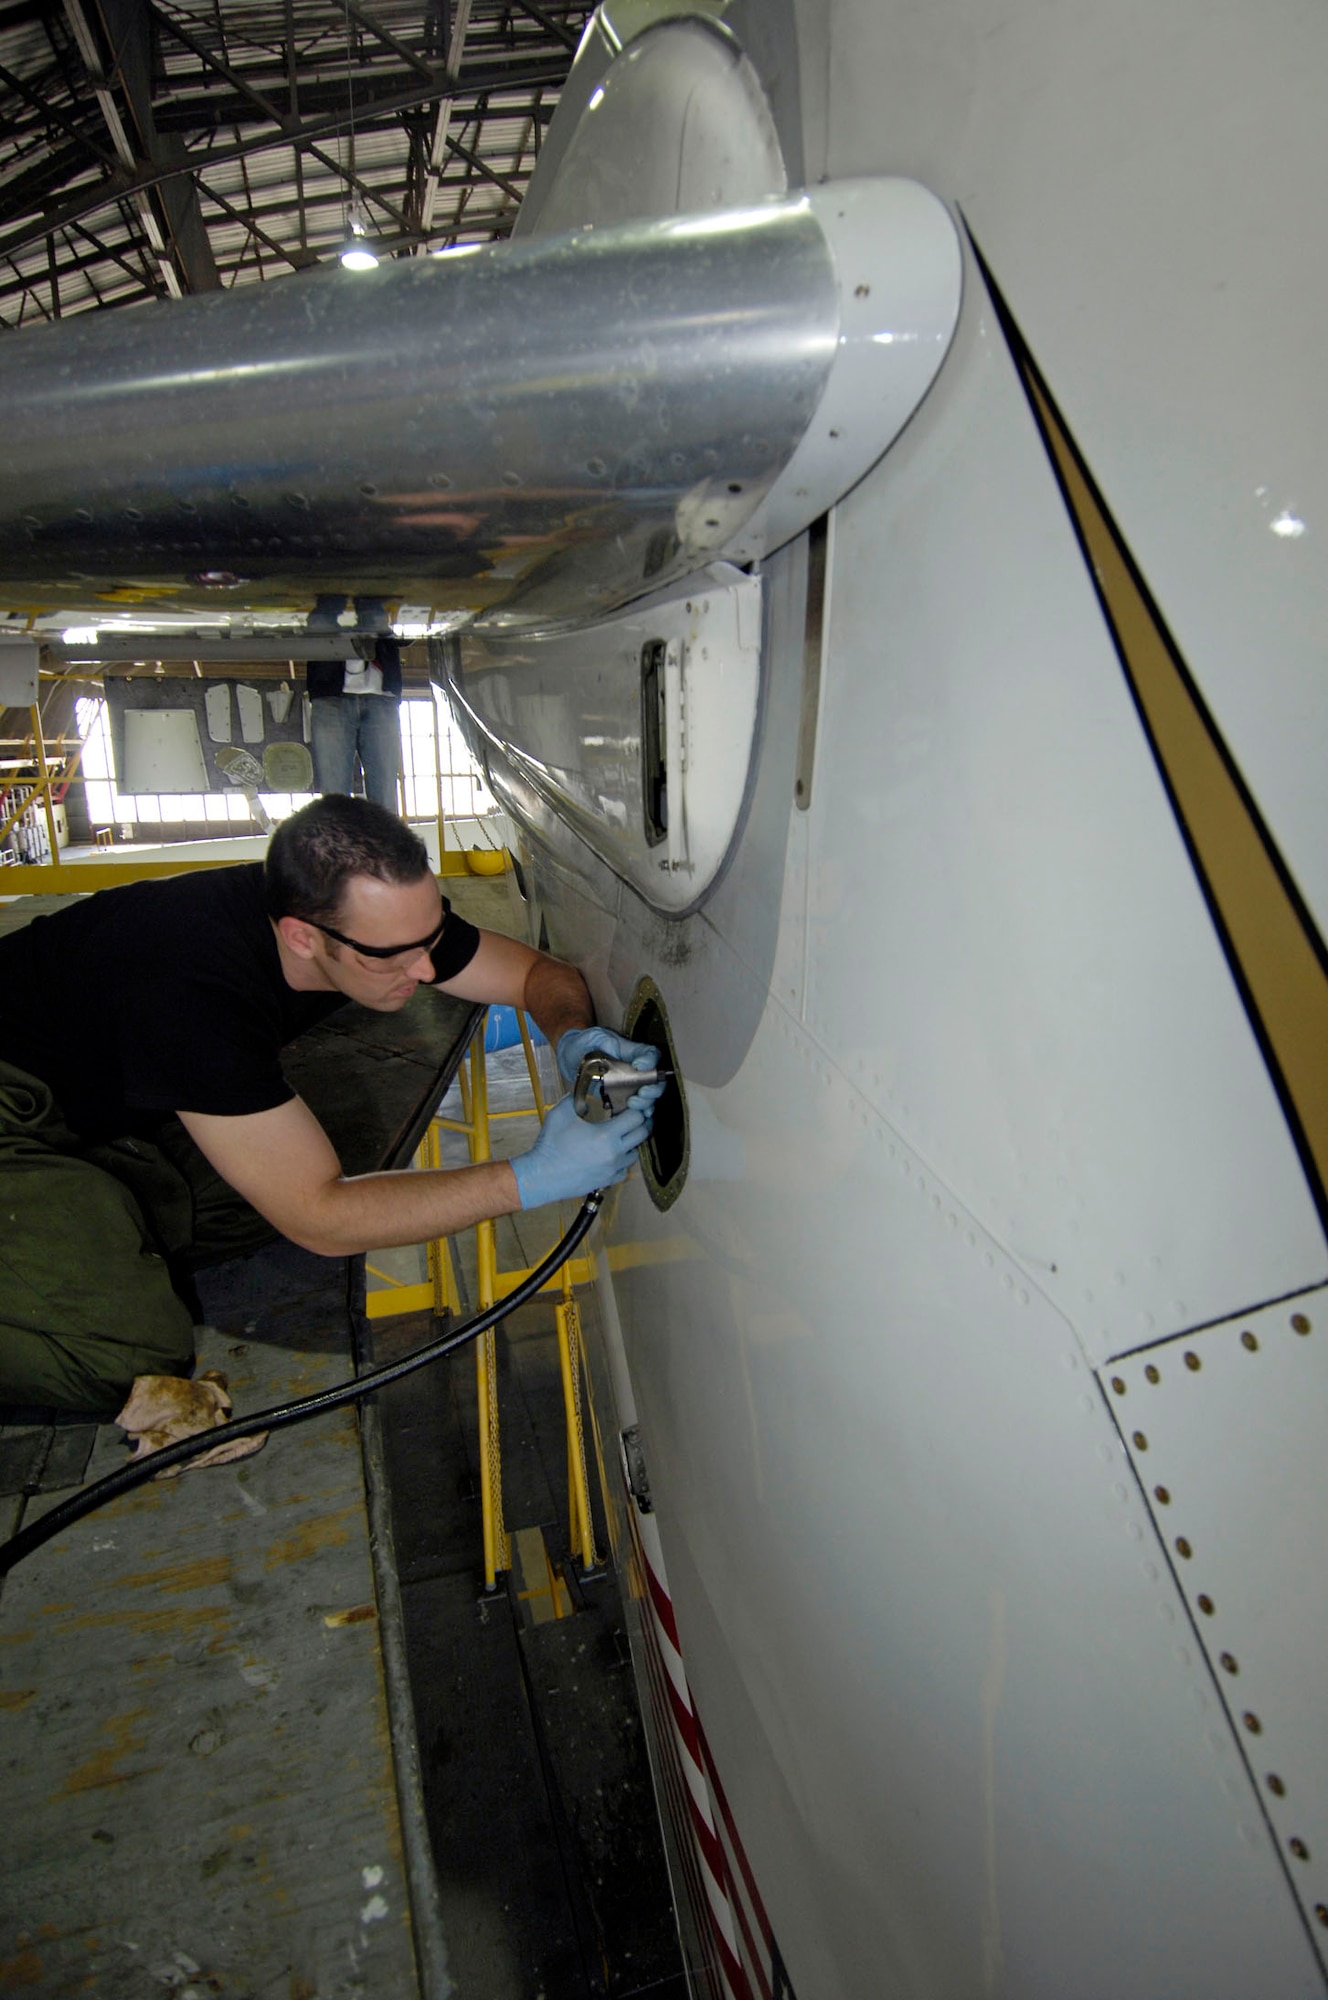 Senior Airman Kevin Jackson, a crew chief from the 932nd Maintenance Group, 932nd Airlift Wing, lubes a jack screw on the tail stabilizer of a C-9C Skytrain aircraft in hangar one, Scott AFB, Ill.  Assigned to the 932nd Airlift Wing, the C-9C, along with the C-40C, provide safe, comfortable and reliable transportation for dignitaries other U.S. leaders to locations around the world.  
U.S. Air Force photo/Tech. Sgt. Tony R. Tolley
